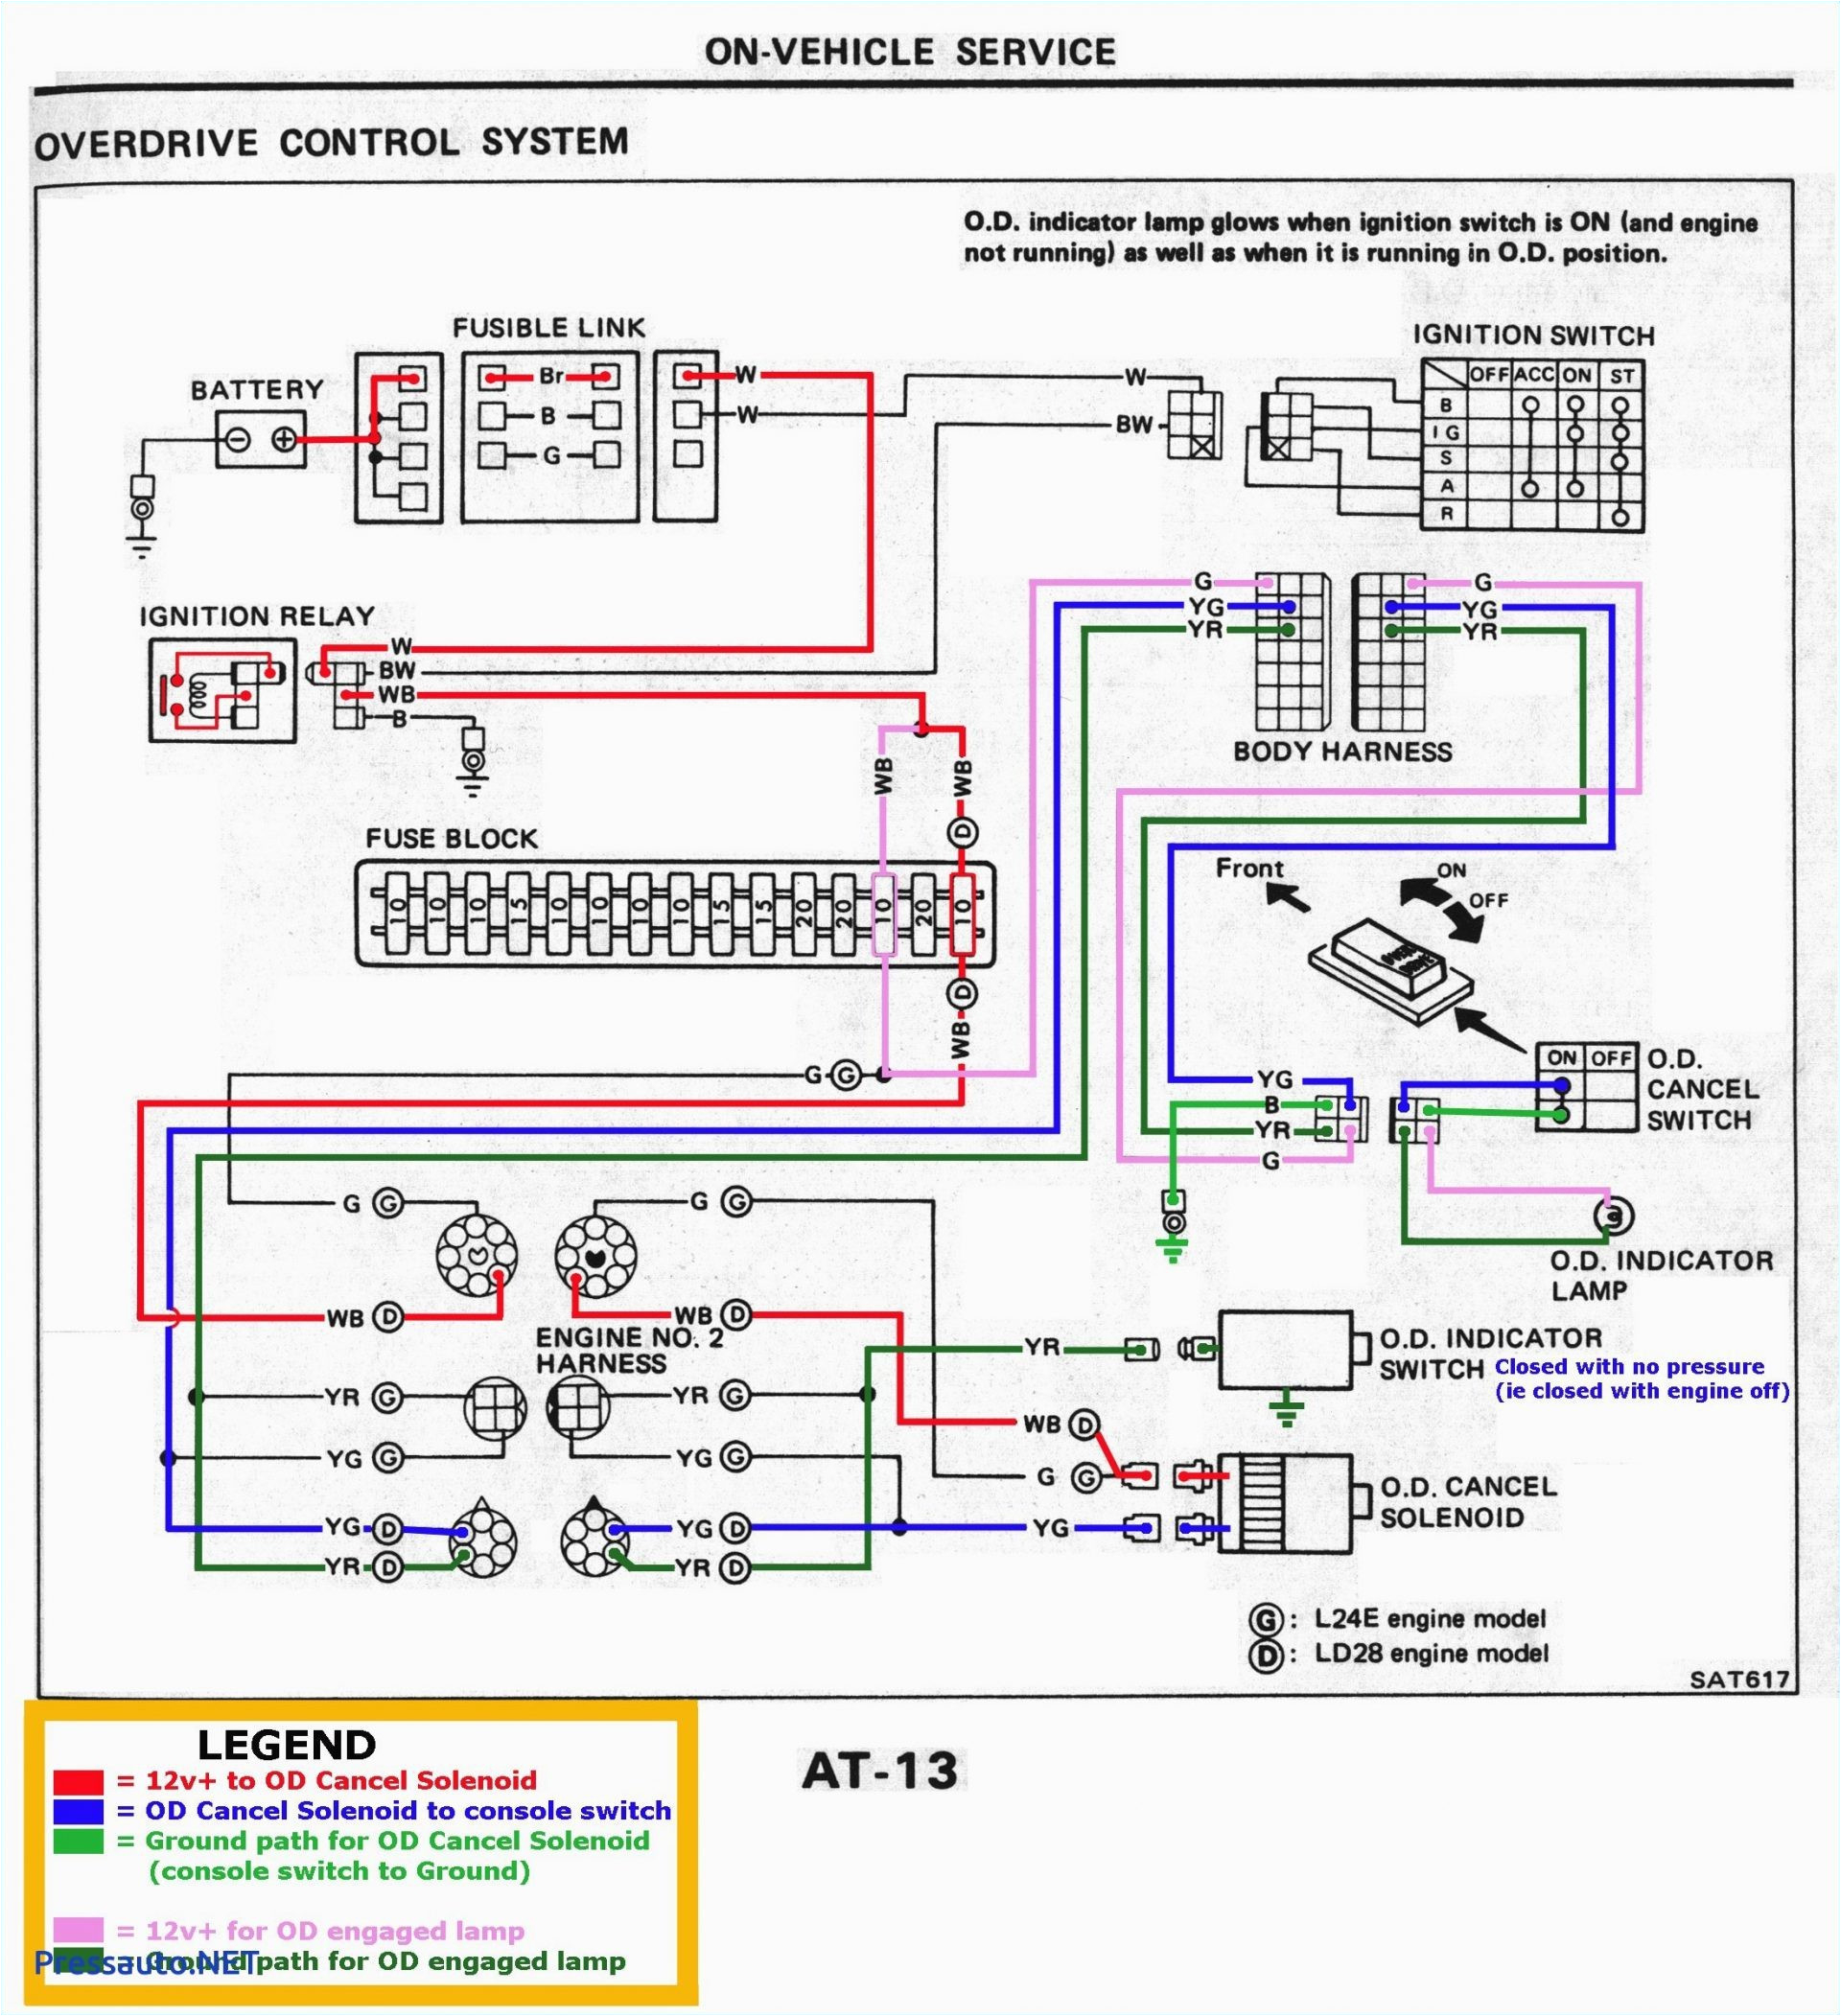 pictures gallery of starter wiring diagram chevy lovely starter relay diagram